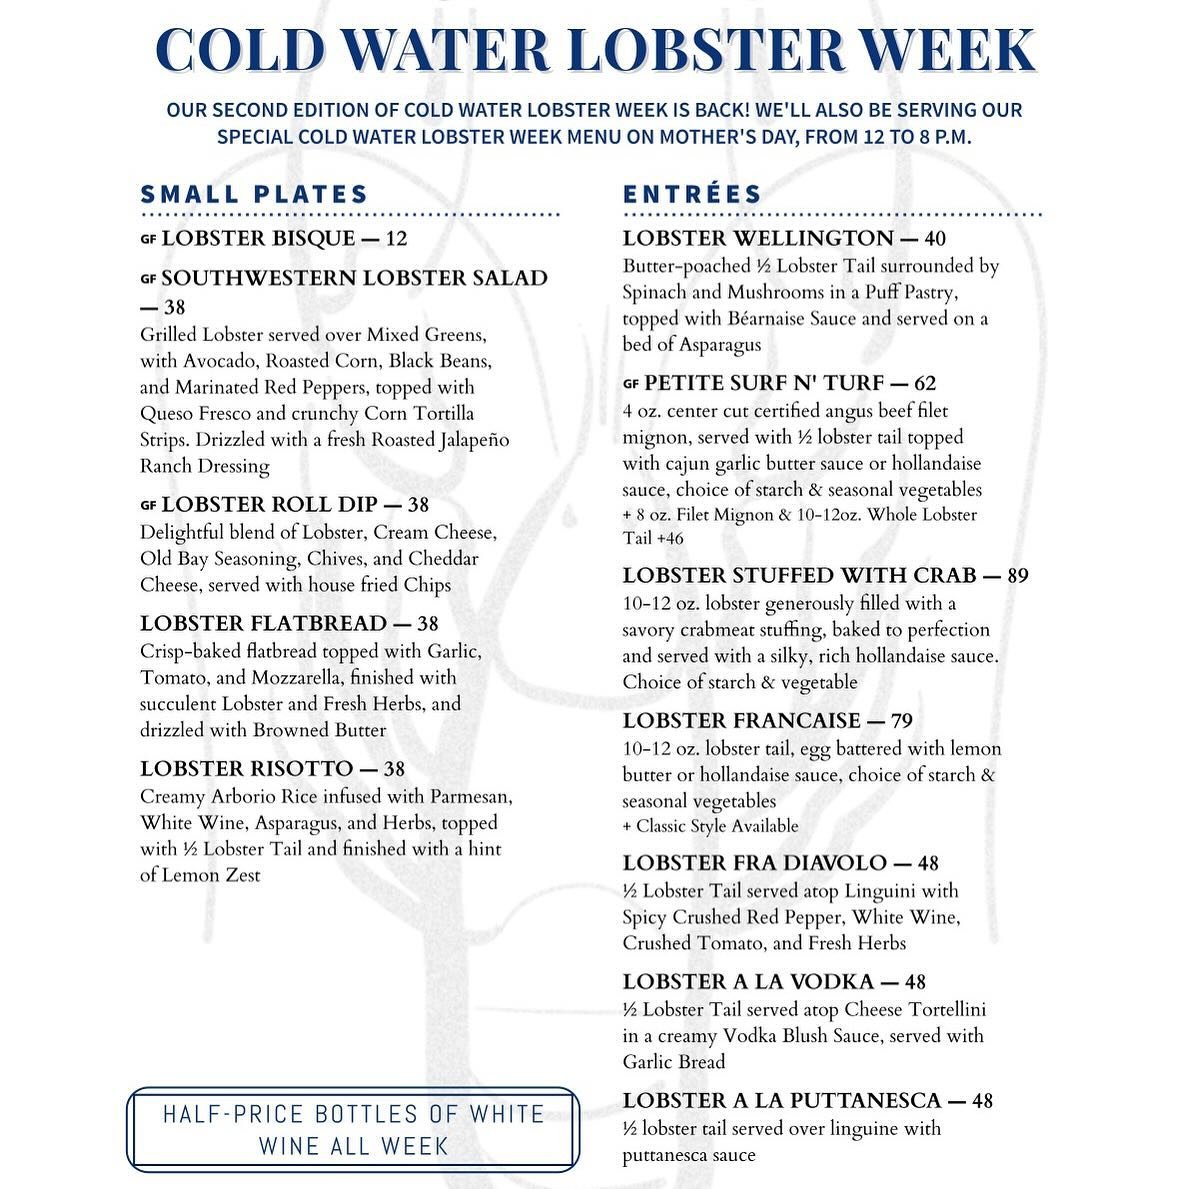 Thank you to everyone who joined us last week for Lobster Week! The response was amazing, and we&rsquo;re bringing it back with new additions this week. We&rsquo;ll also feature the menu on Mother&rsquo;s Day from 12-8 p.m. Don&rsquo;t miss out on th